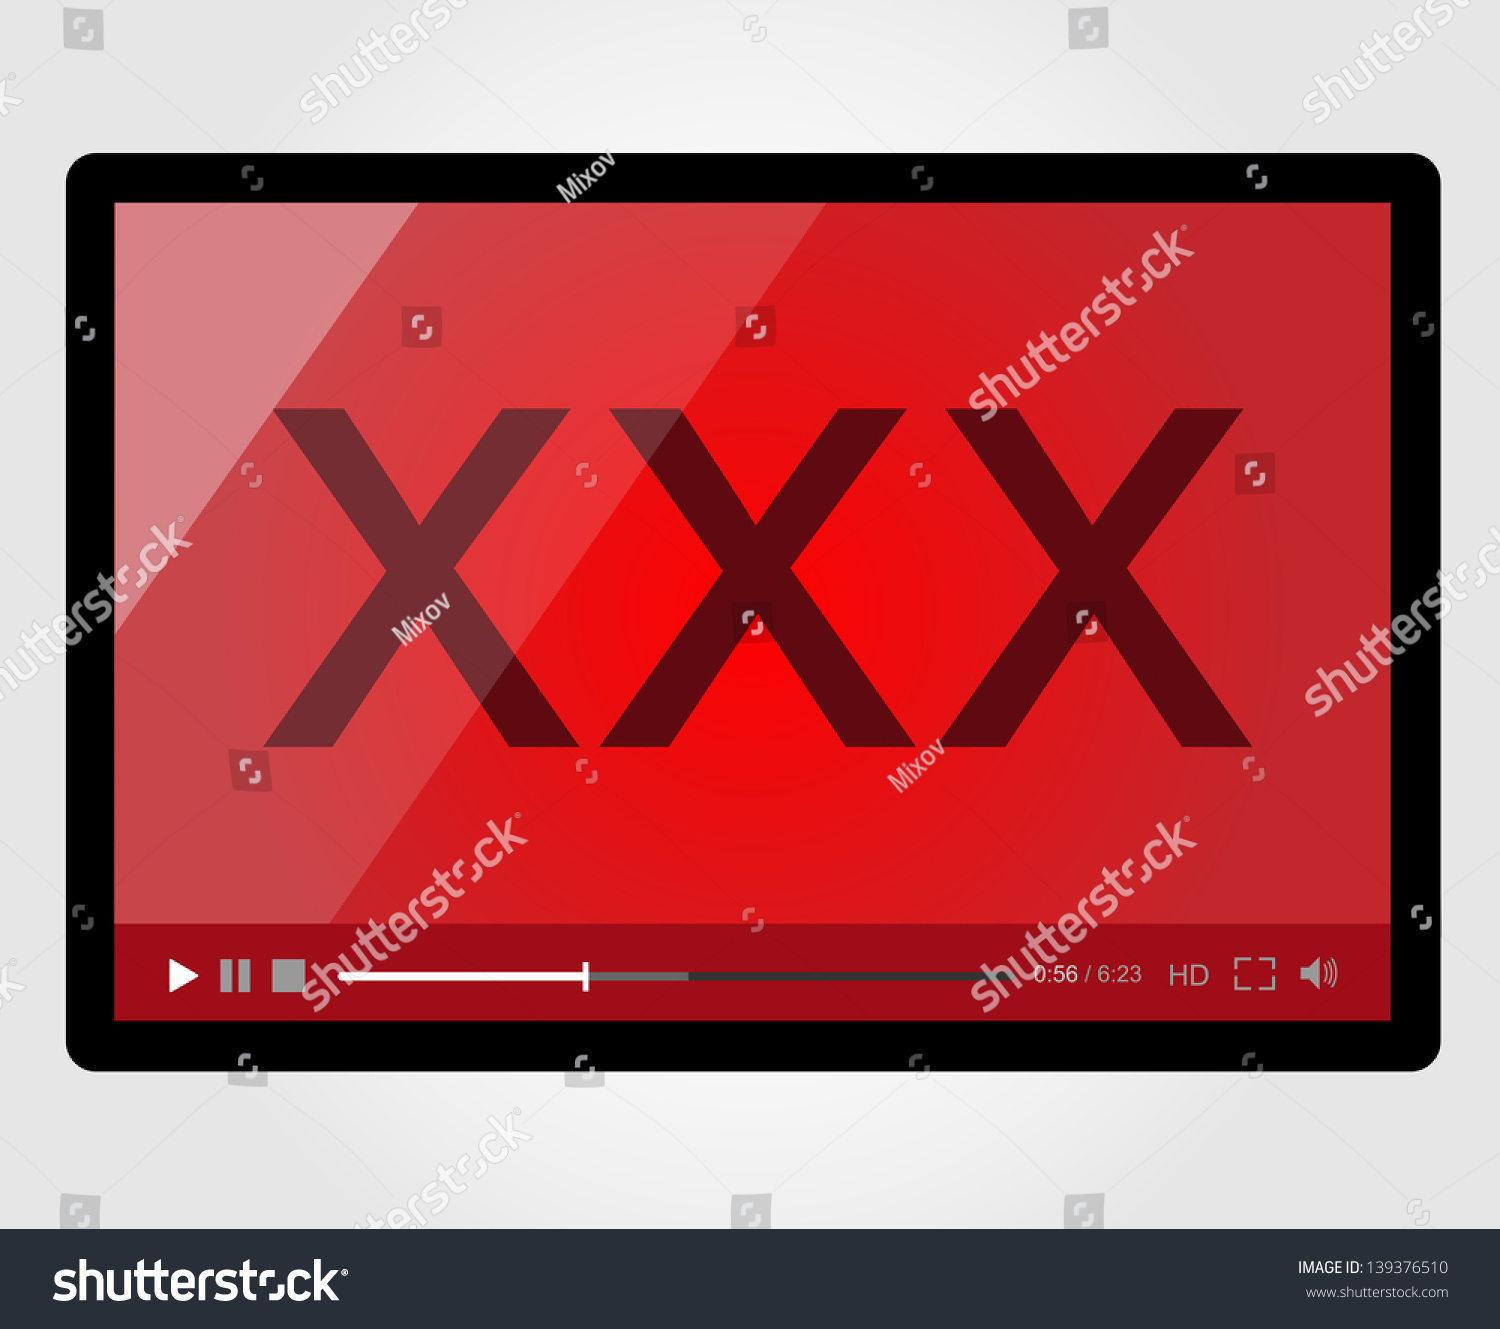 Video Player For Web Xxx Adult Stock Vector Illustration 139376510 Shutterstock 